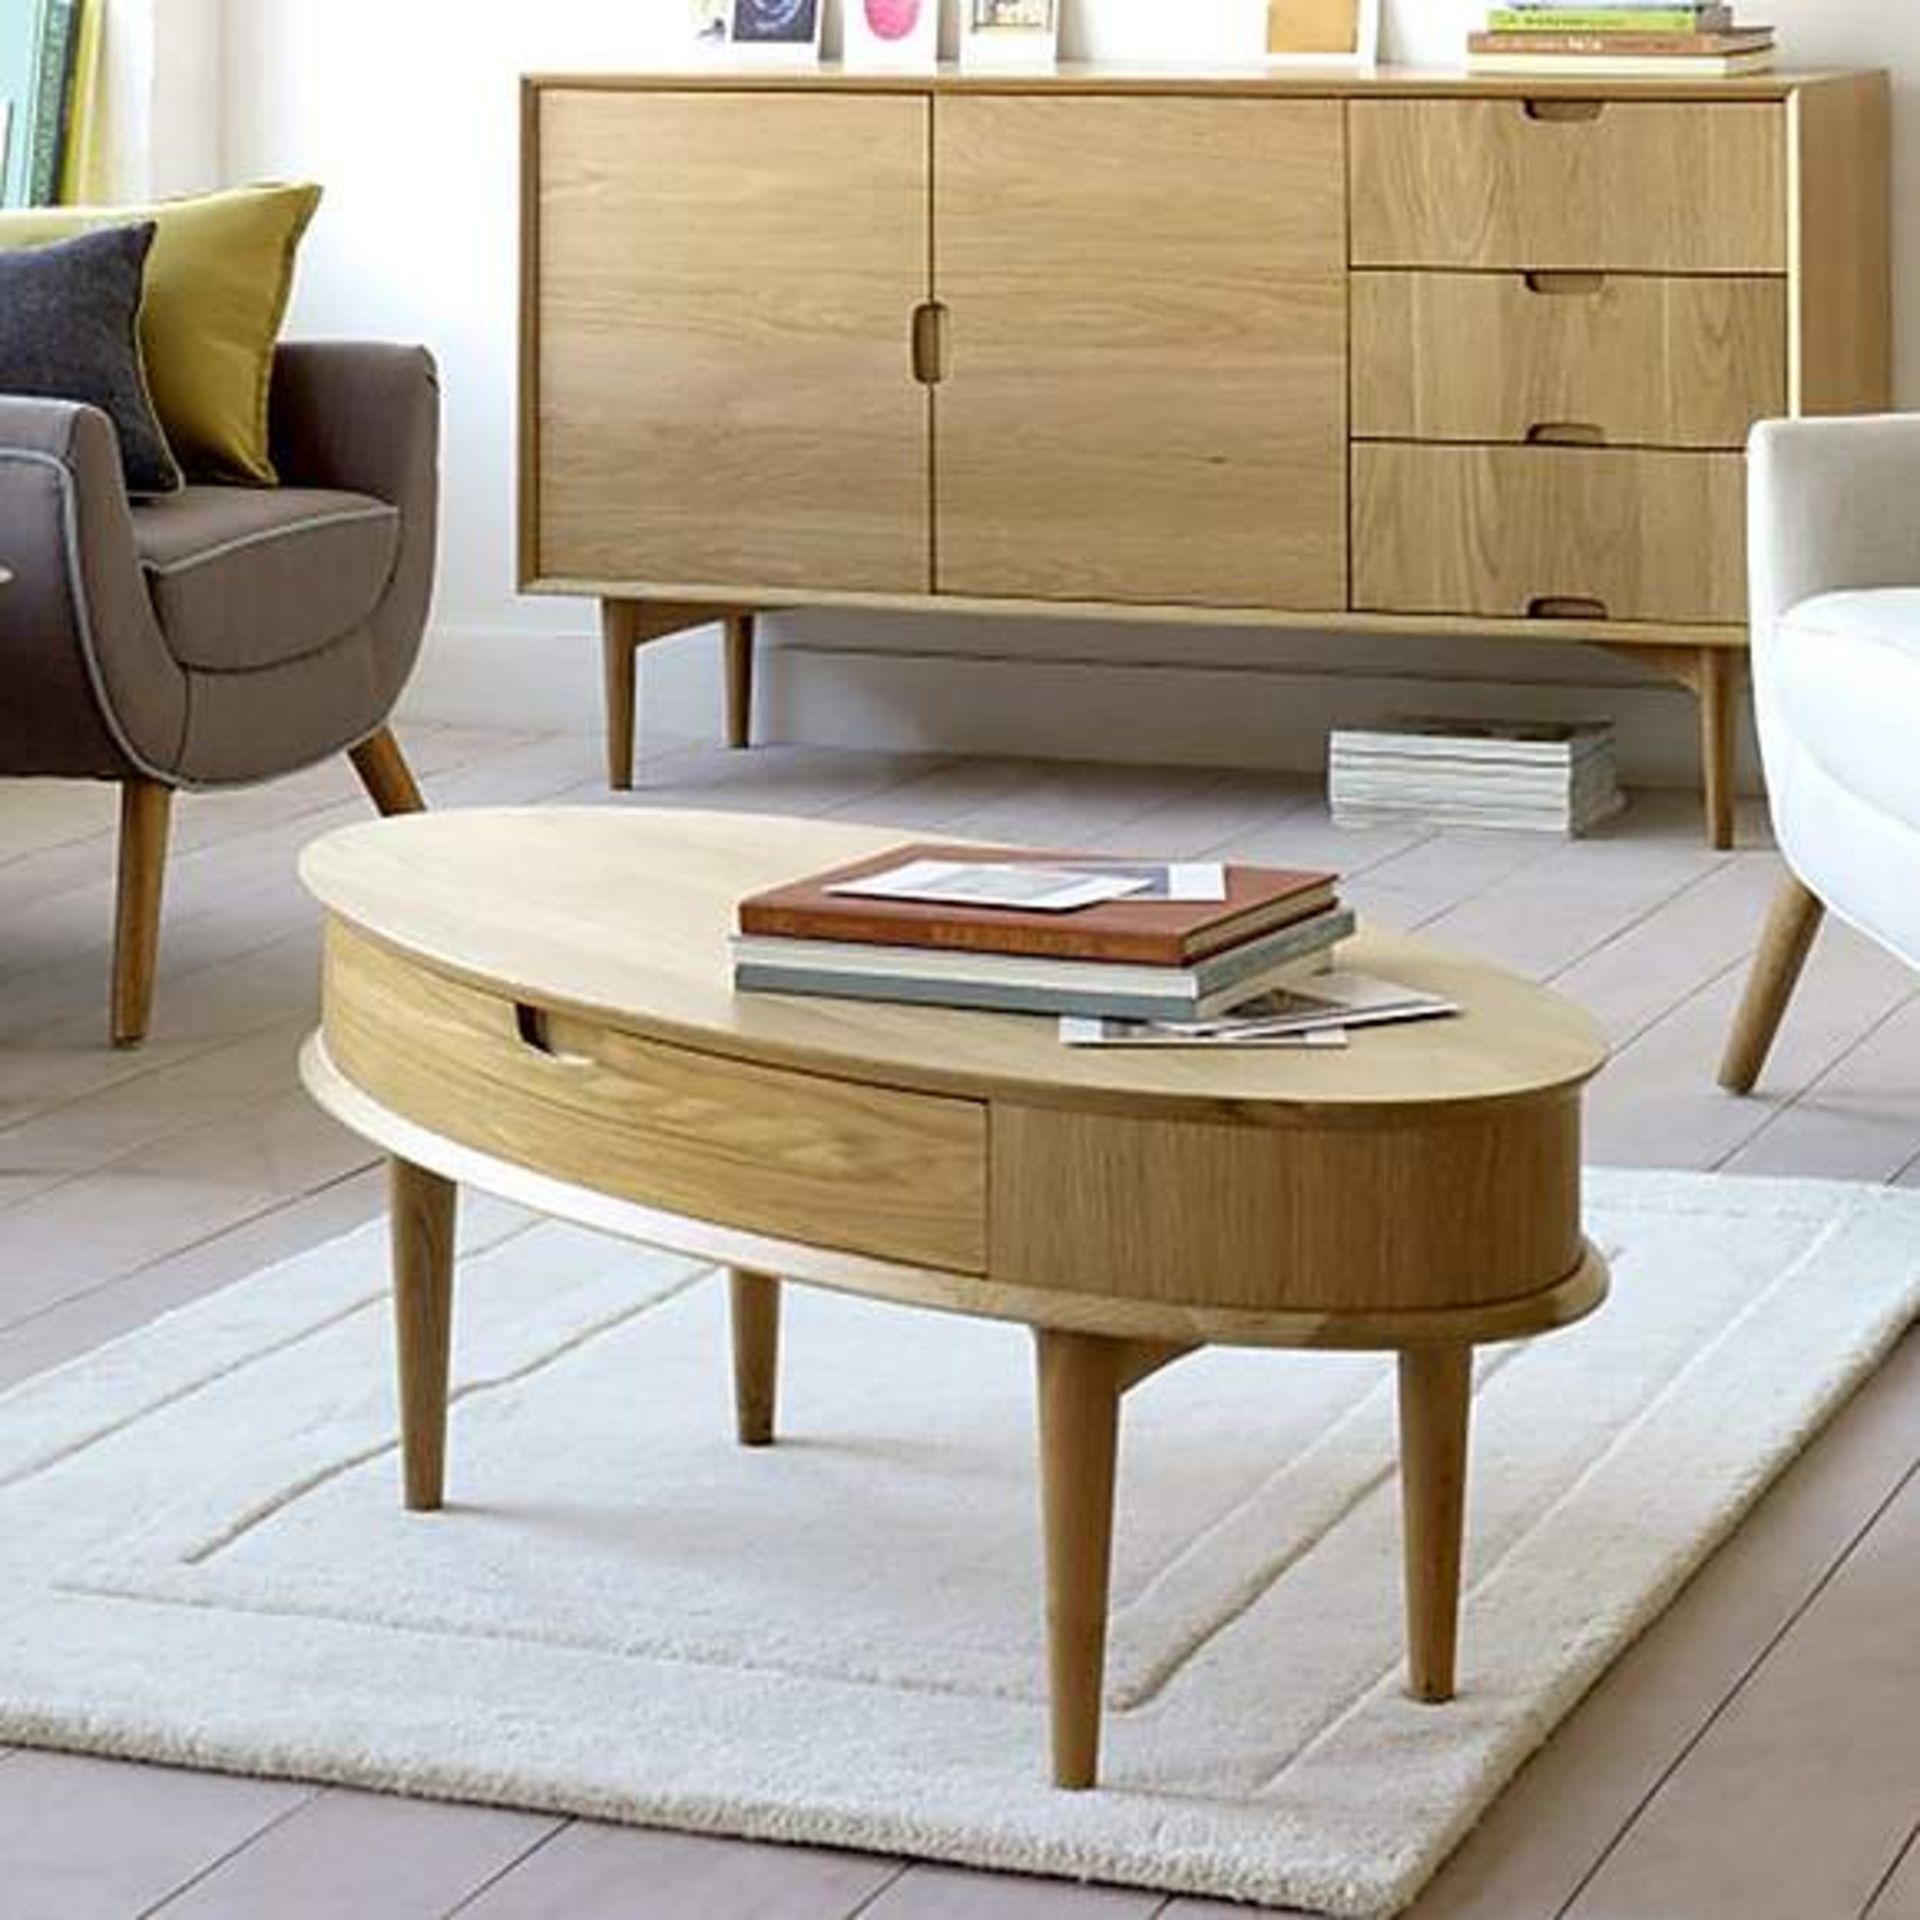 Norse Oak Coffee Table with Drawer Crafted from solid oak wood and light oak veneer, this easy to